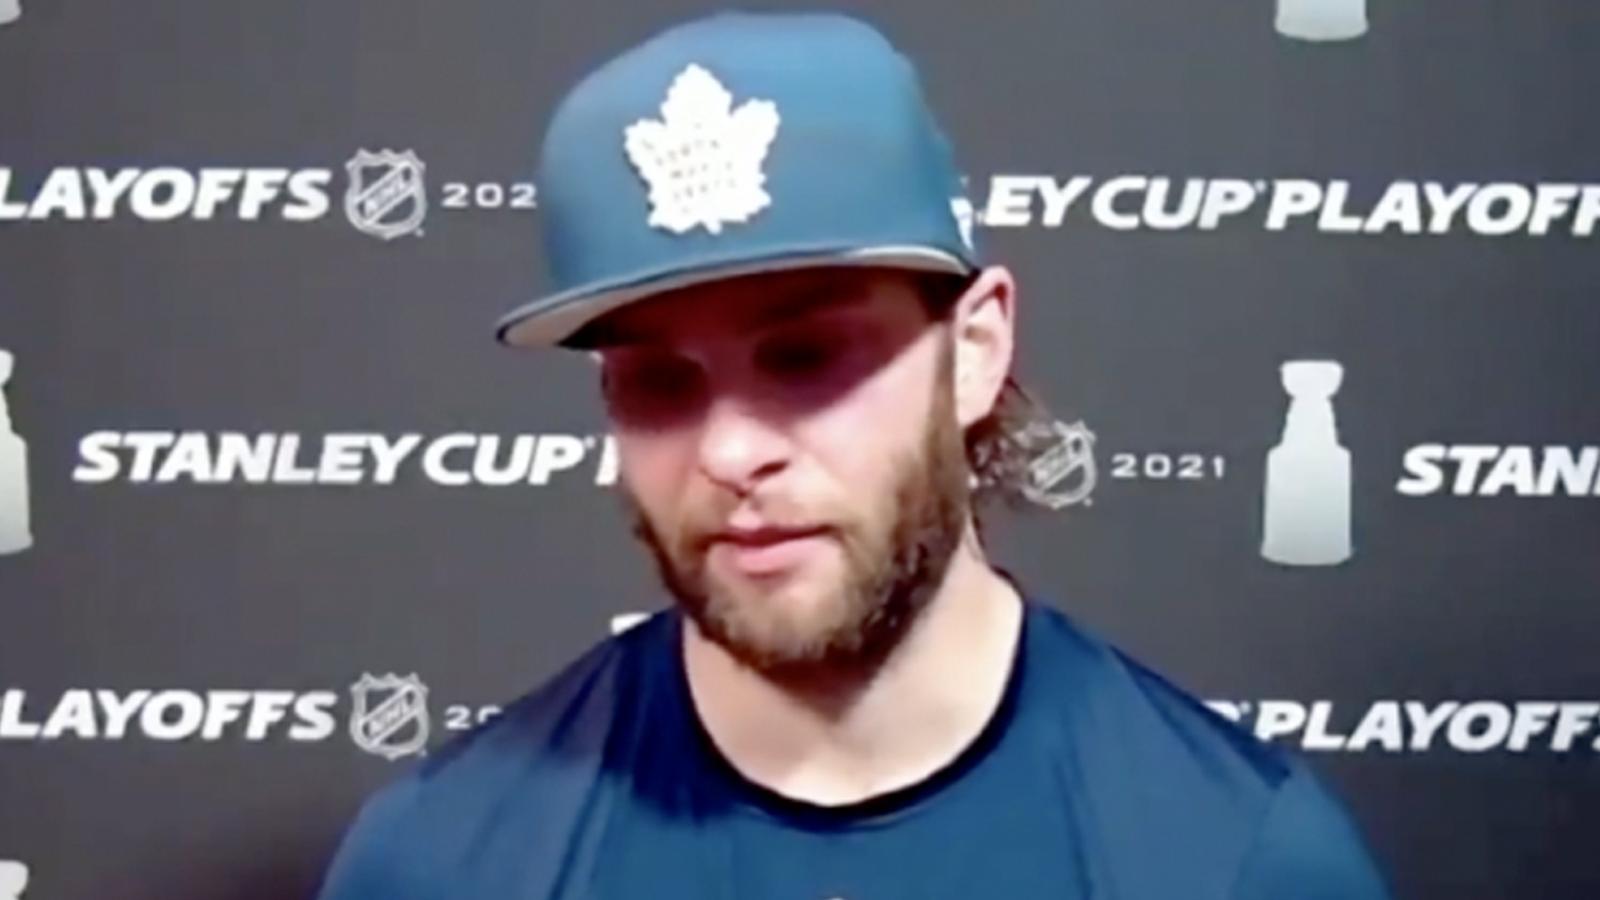 An extremely emotional Jack Campbell shoulders the blame for Leafs' Game 7 loss